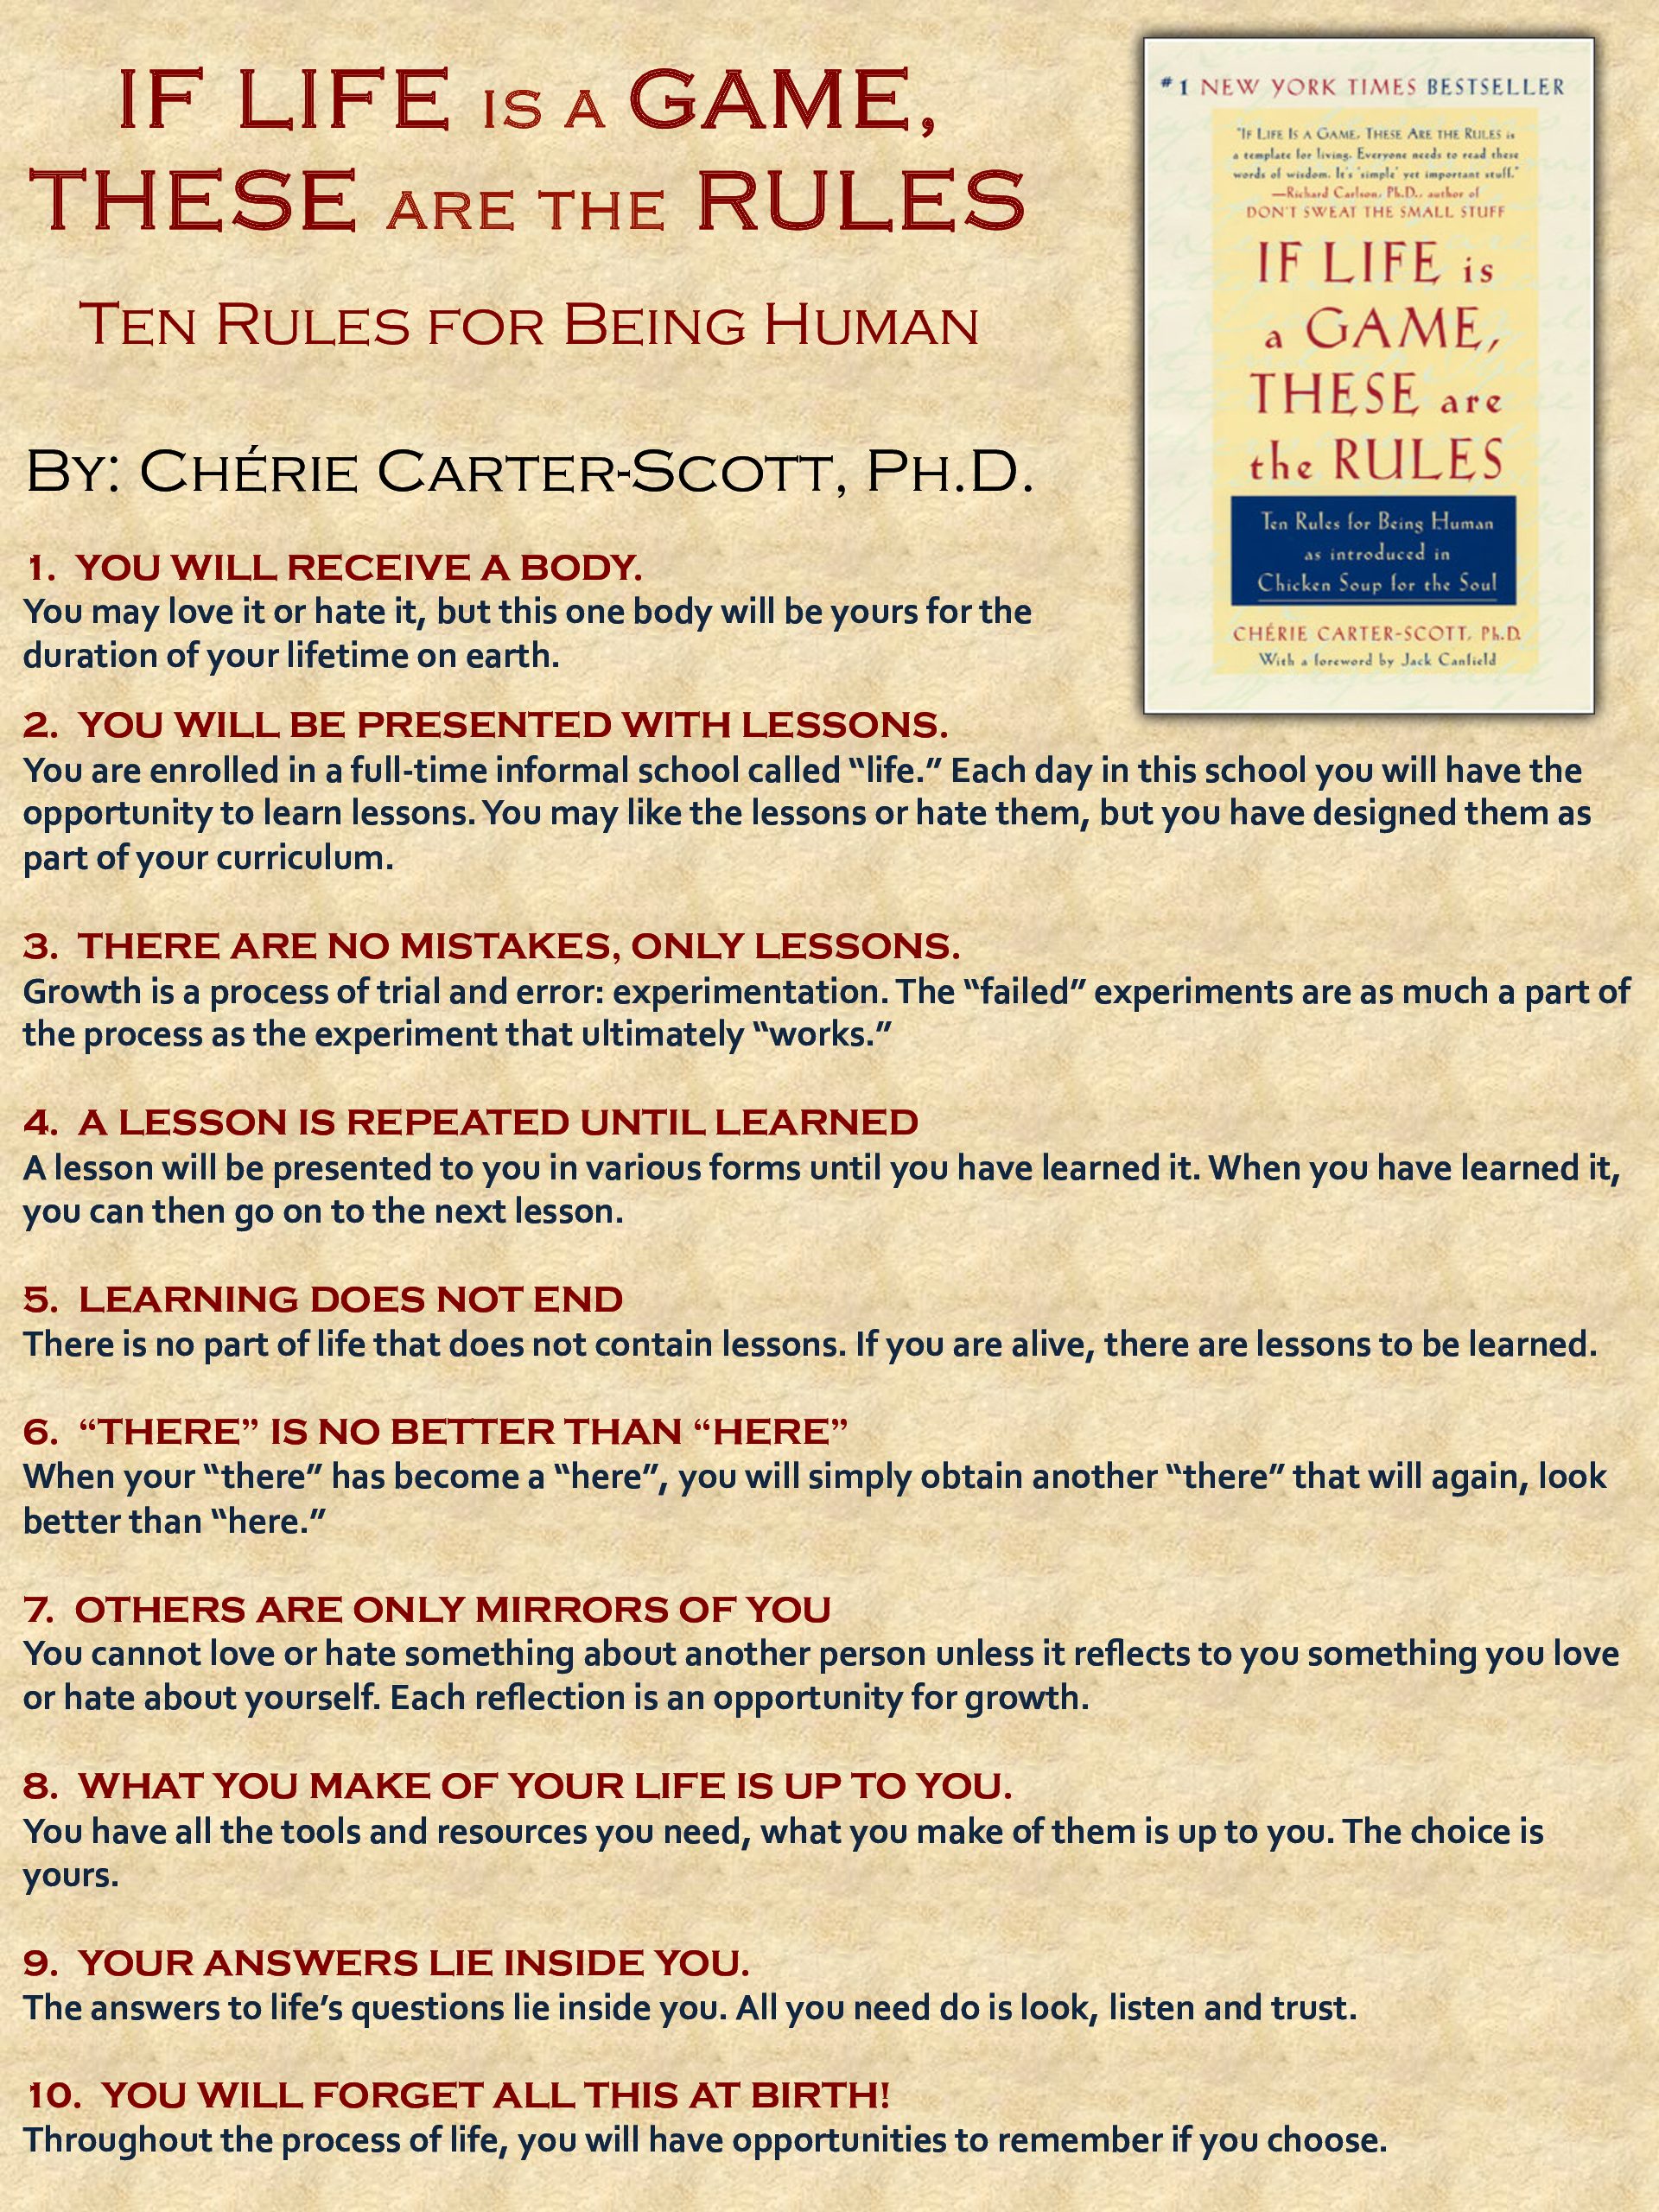 VISUAL | Rules for being human